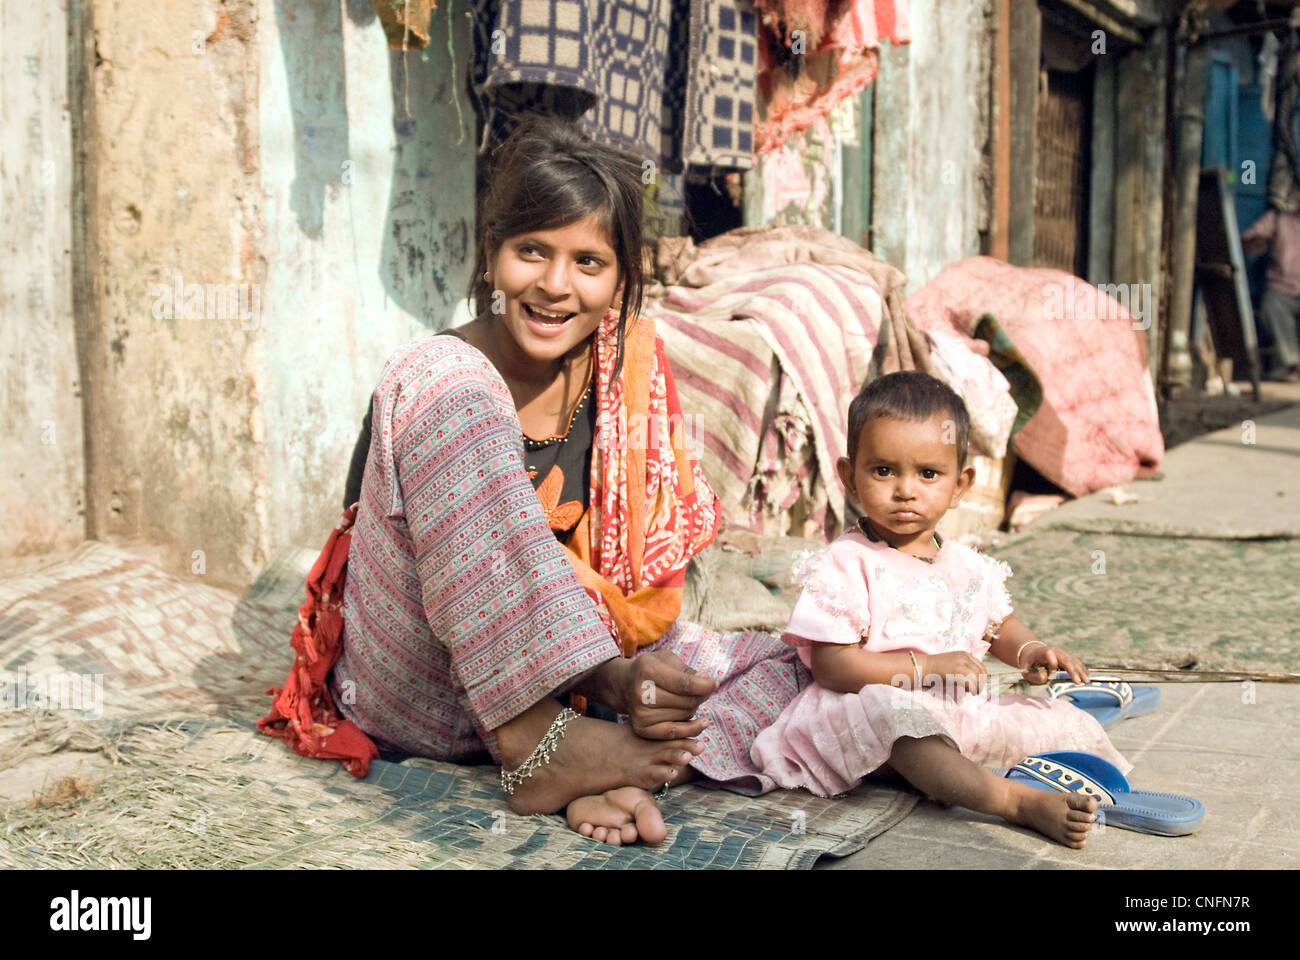 Girl with kid sitting in front of their house in Kolkata slum area Stock Photo